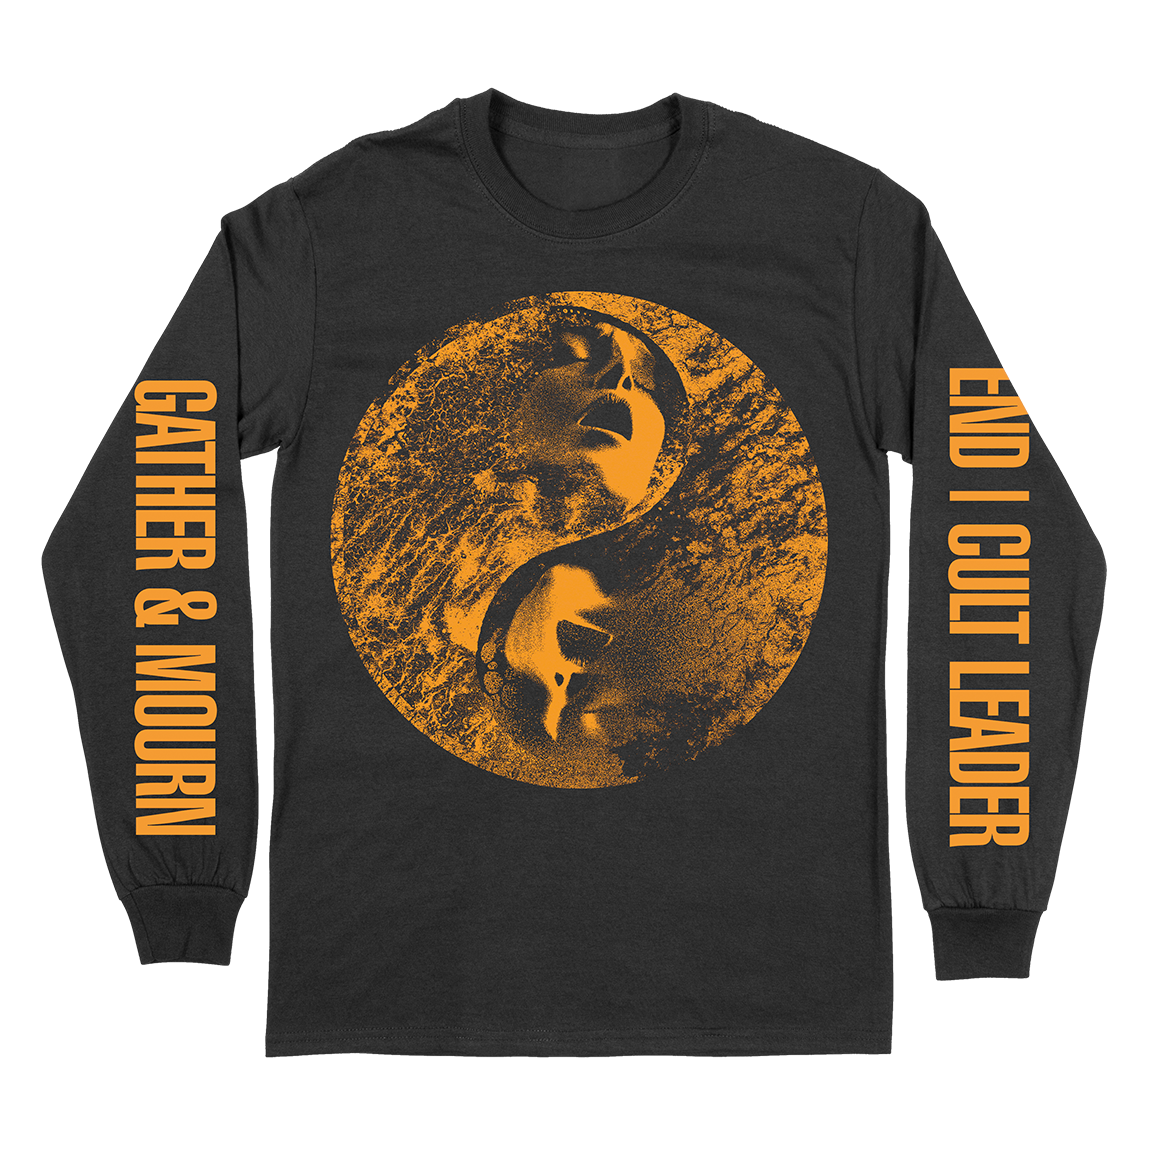 END - Gather & Mourn Long Sleeve Gold